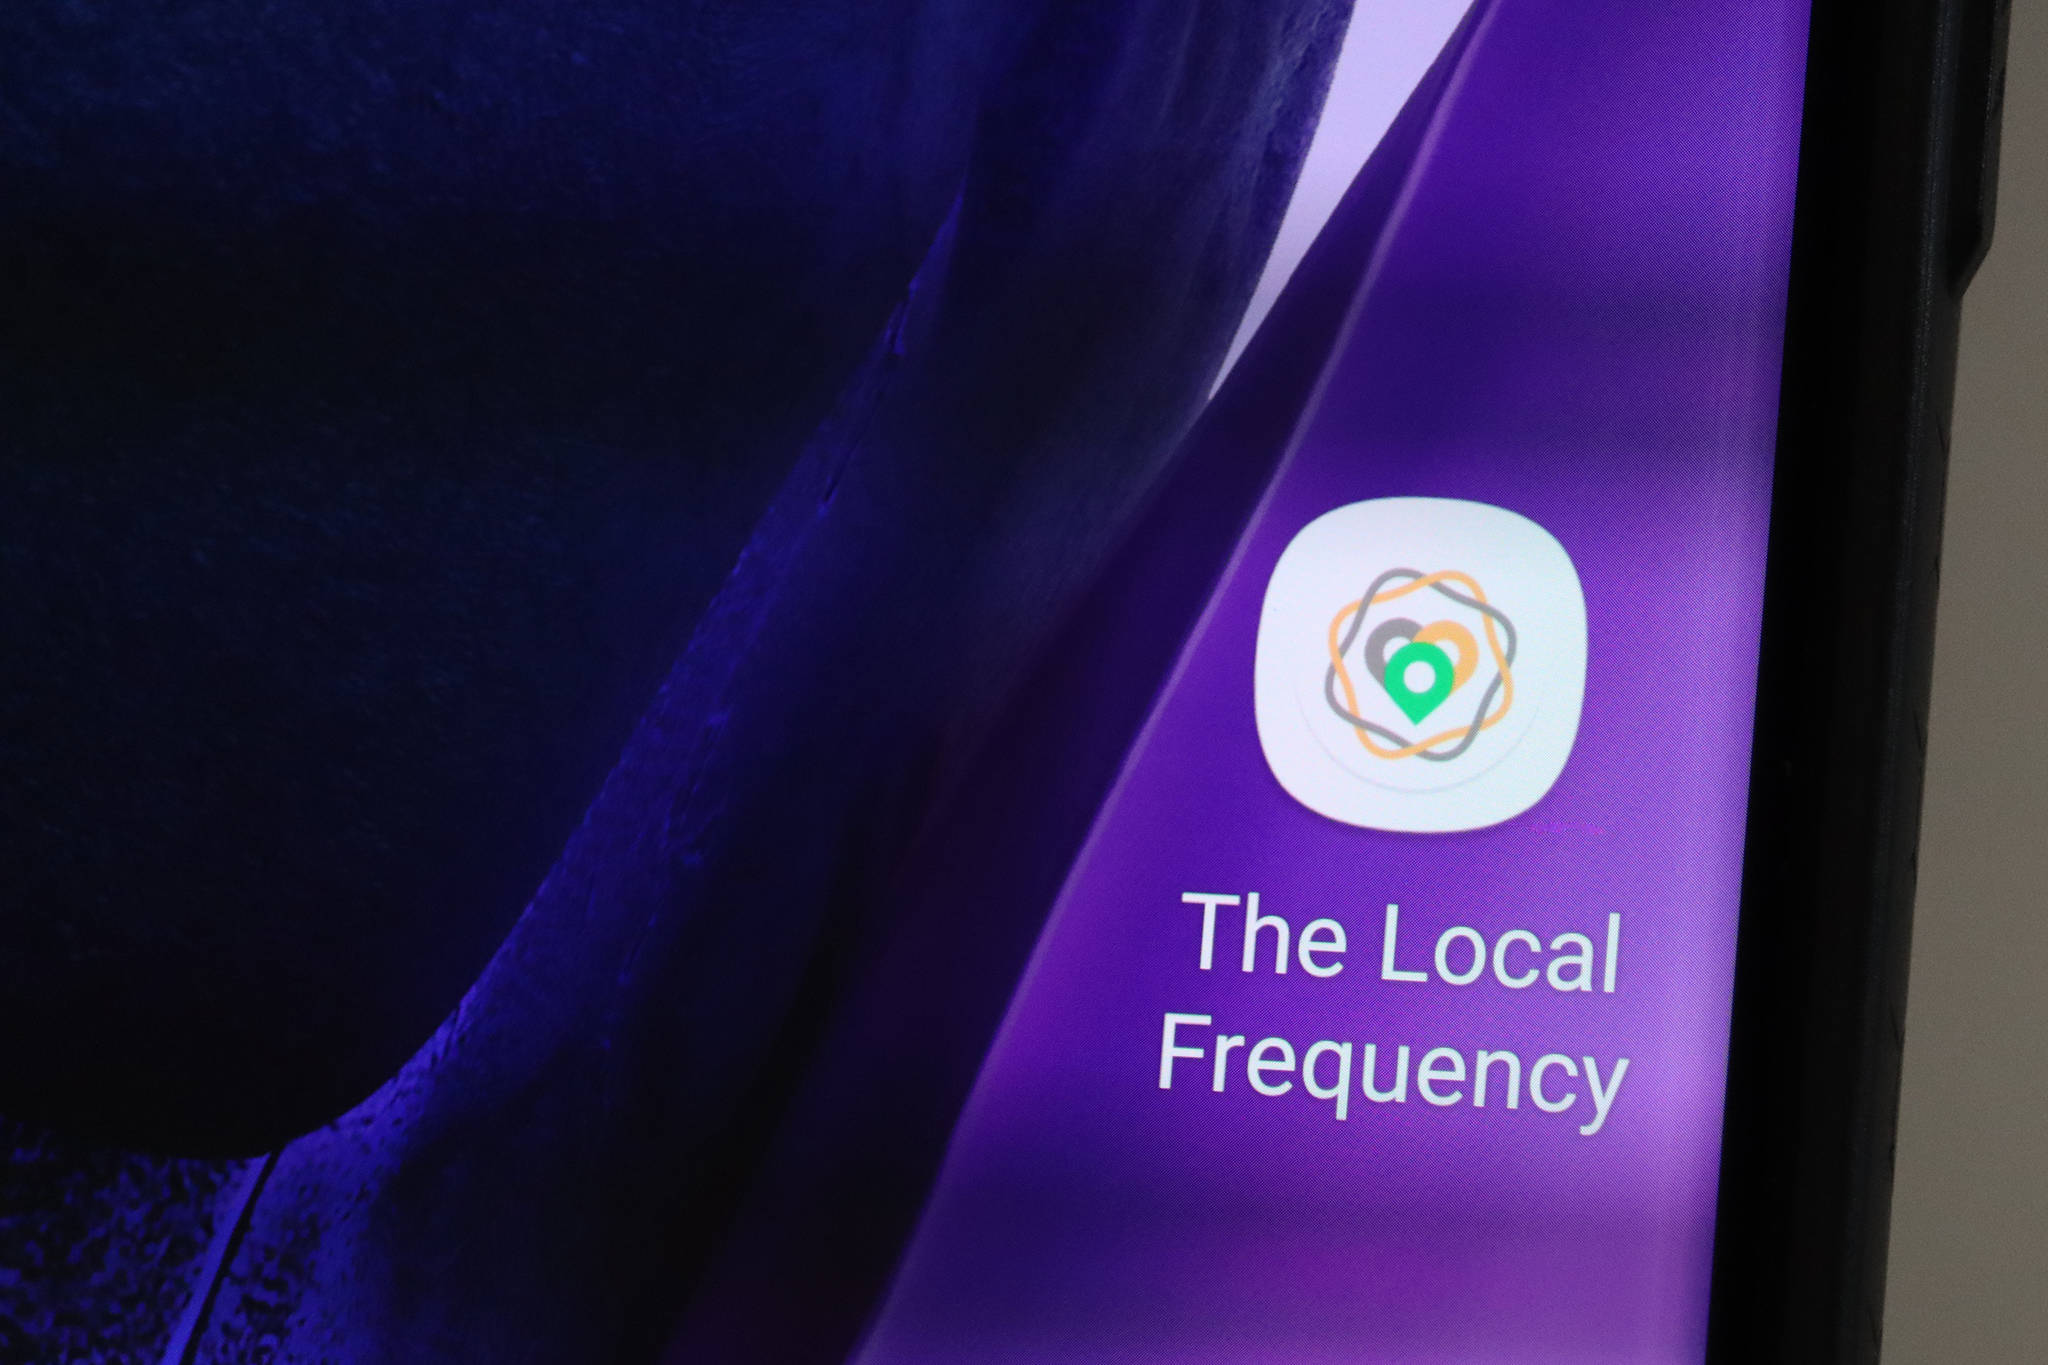 Juneau businesses now offer rewards through the Local Frequency application. The smartphone-based app aims to give locally-owned businesses loyalty, rebate, and promotion opportunities with a community-based twist. (Ben Hohenstatt/Juneau Empire)